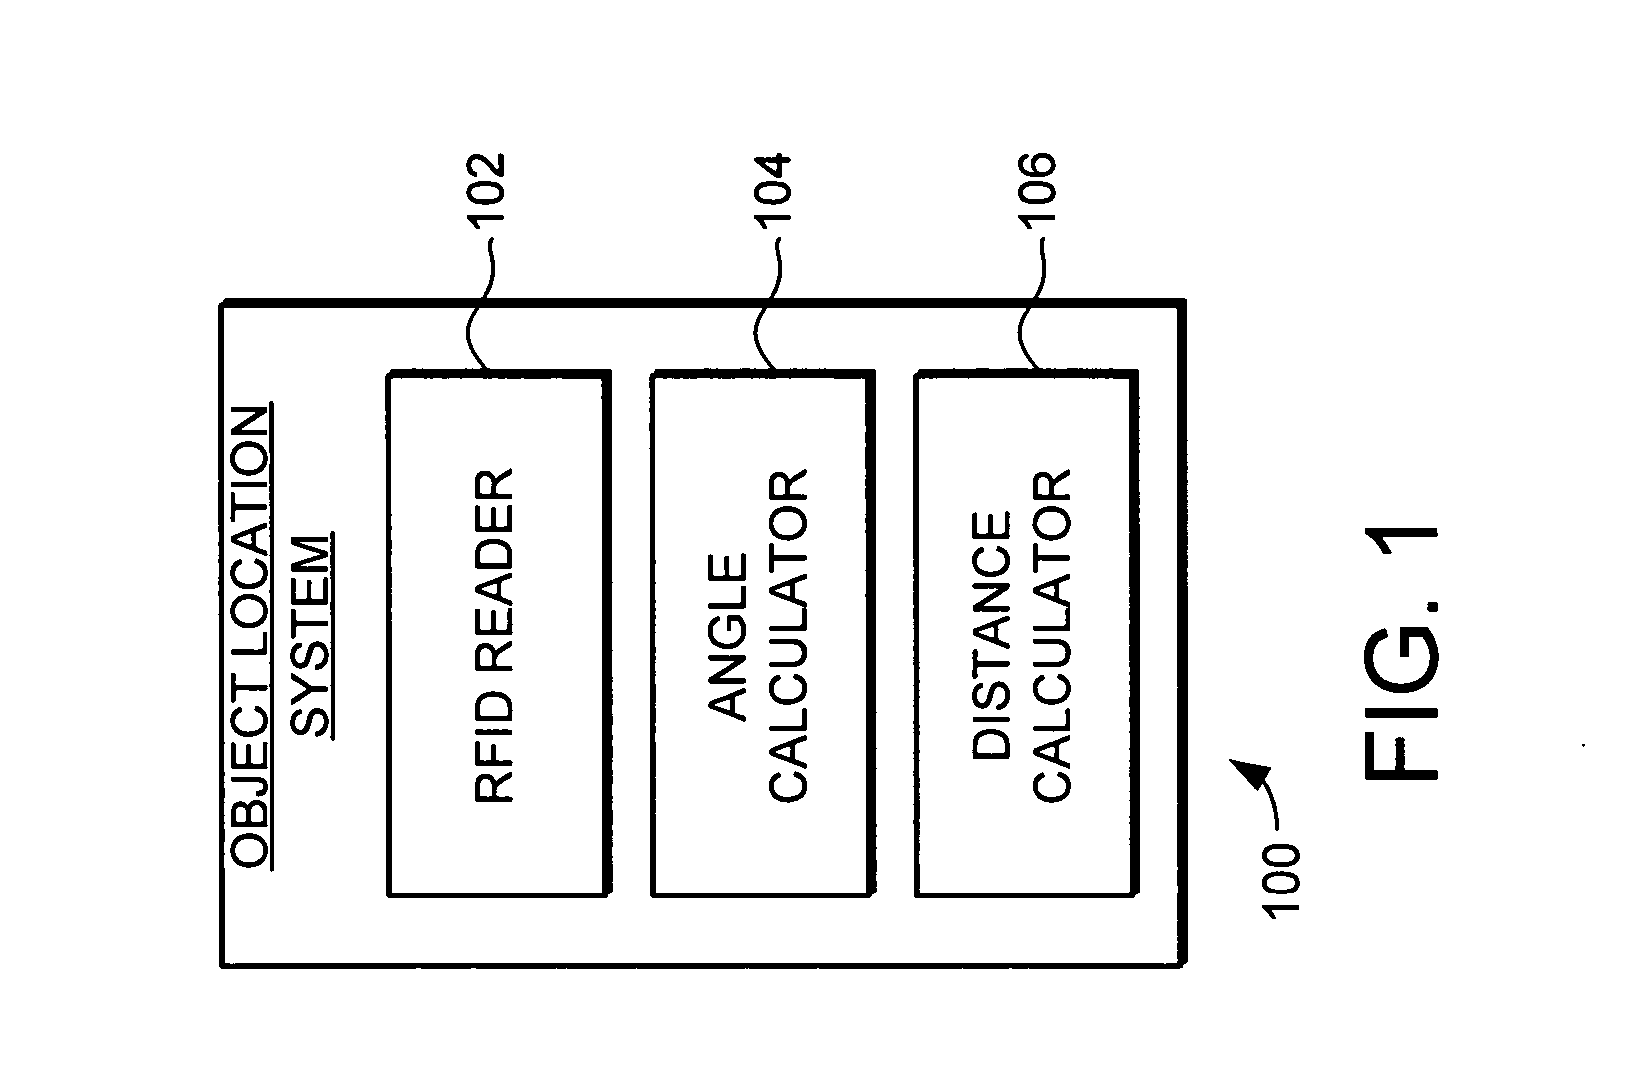 Angle of position object location system and method